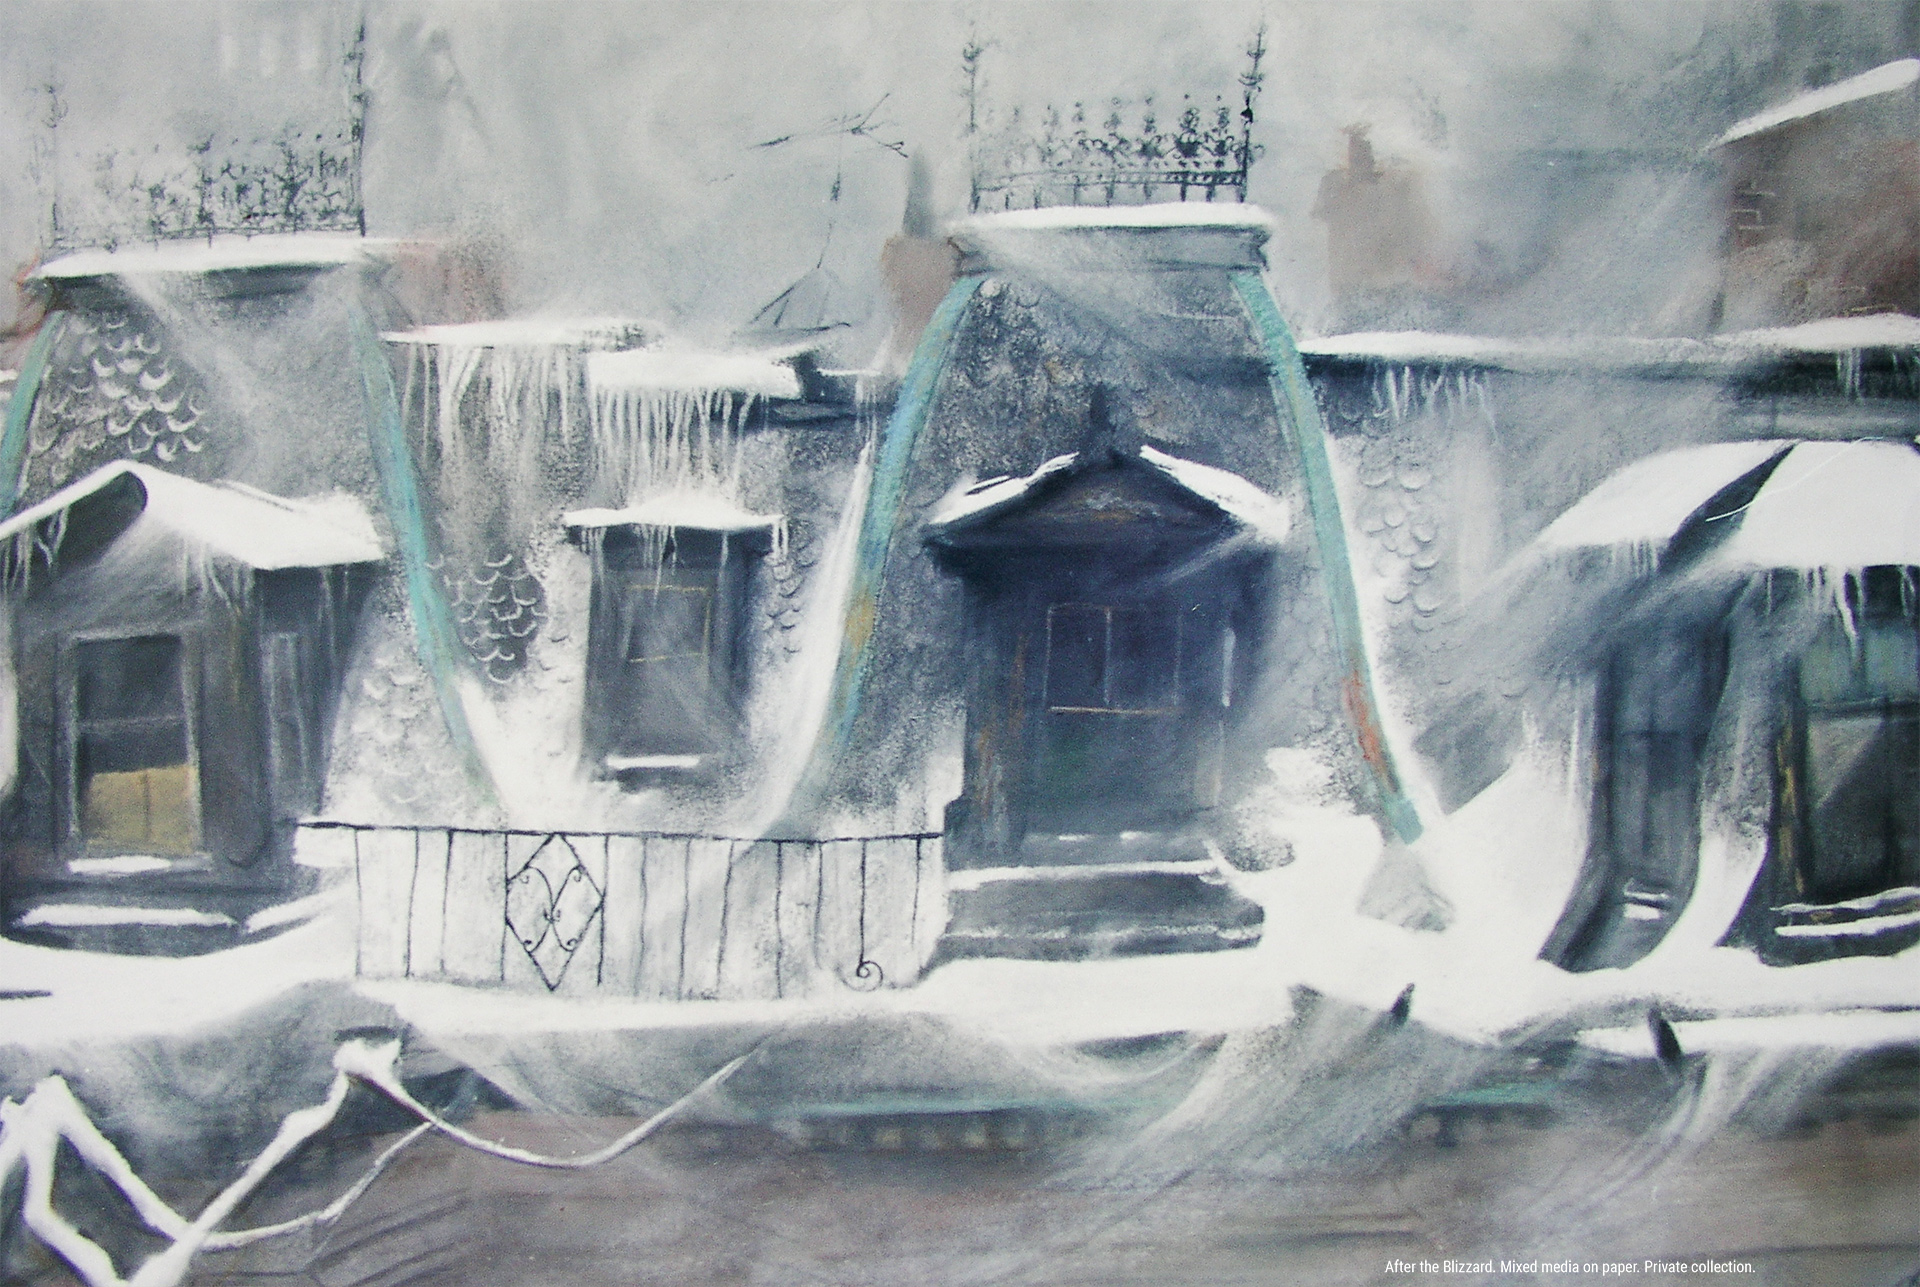 After the Blizzard. Mixed media on paper. Private Collection.